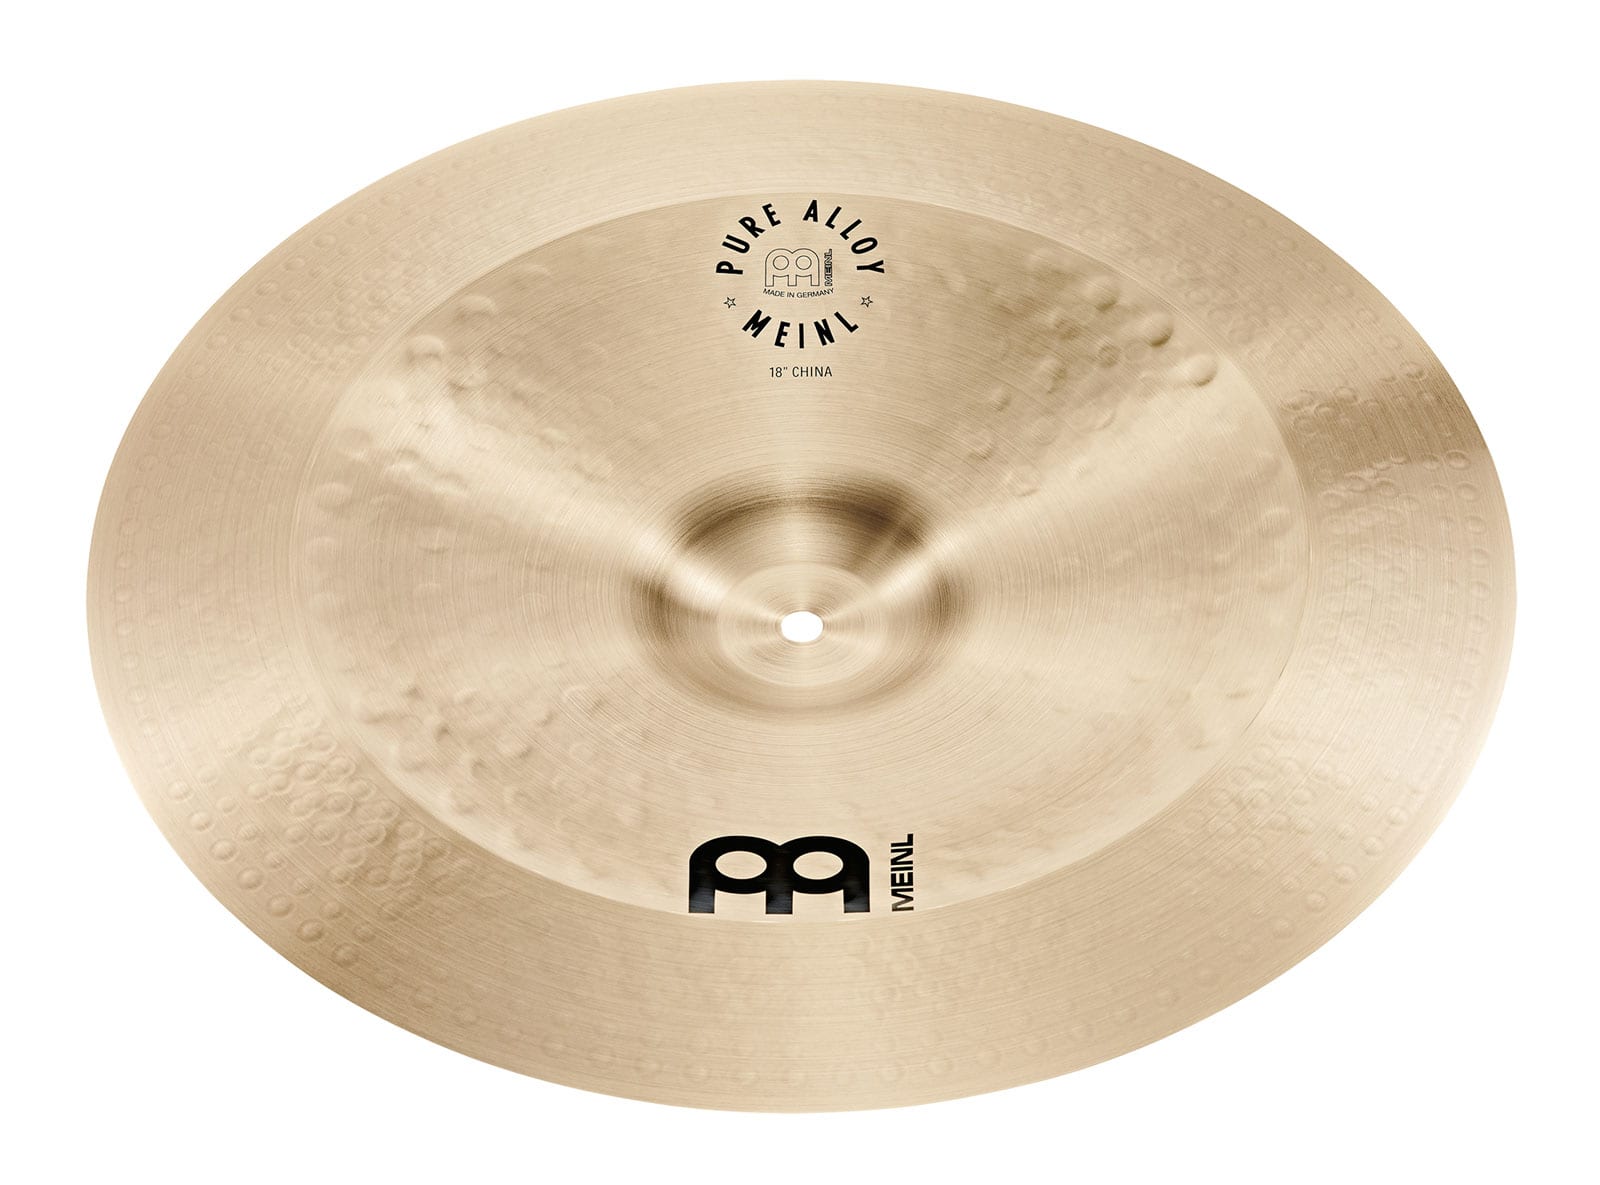 MEINL CHINOISE PURE ALLOY 18